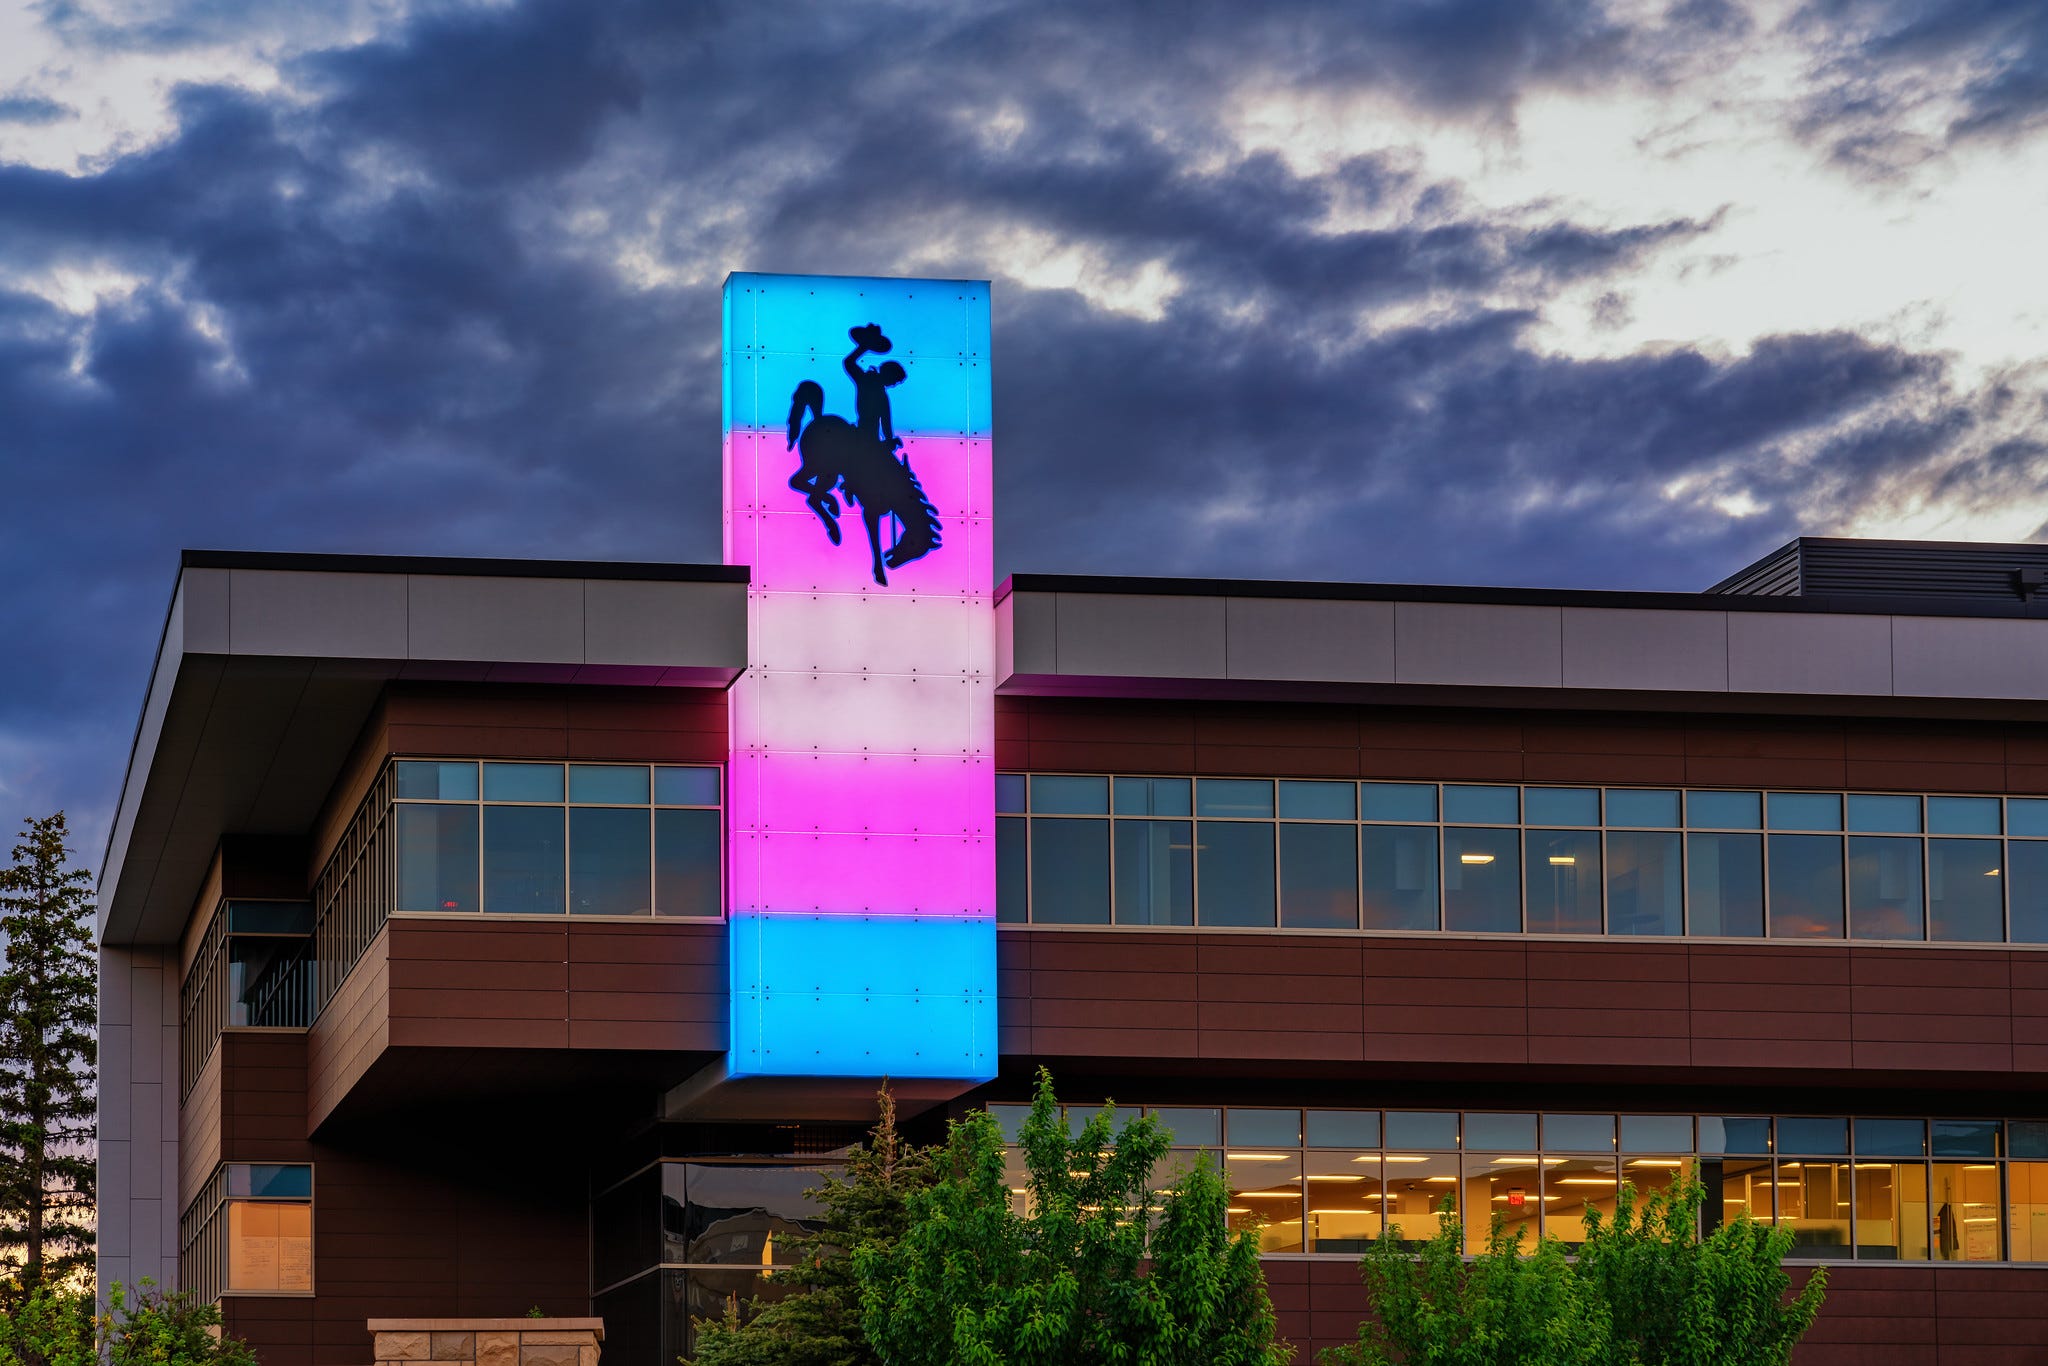 Blue pink and white lights illuminate a steamboat-adorned column on the Rochelle Center. HDR image showing dark cloudy skies in the background.